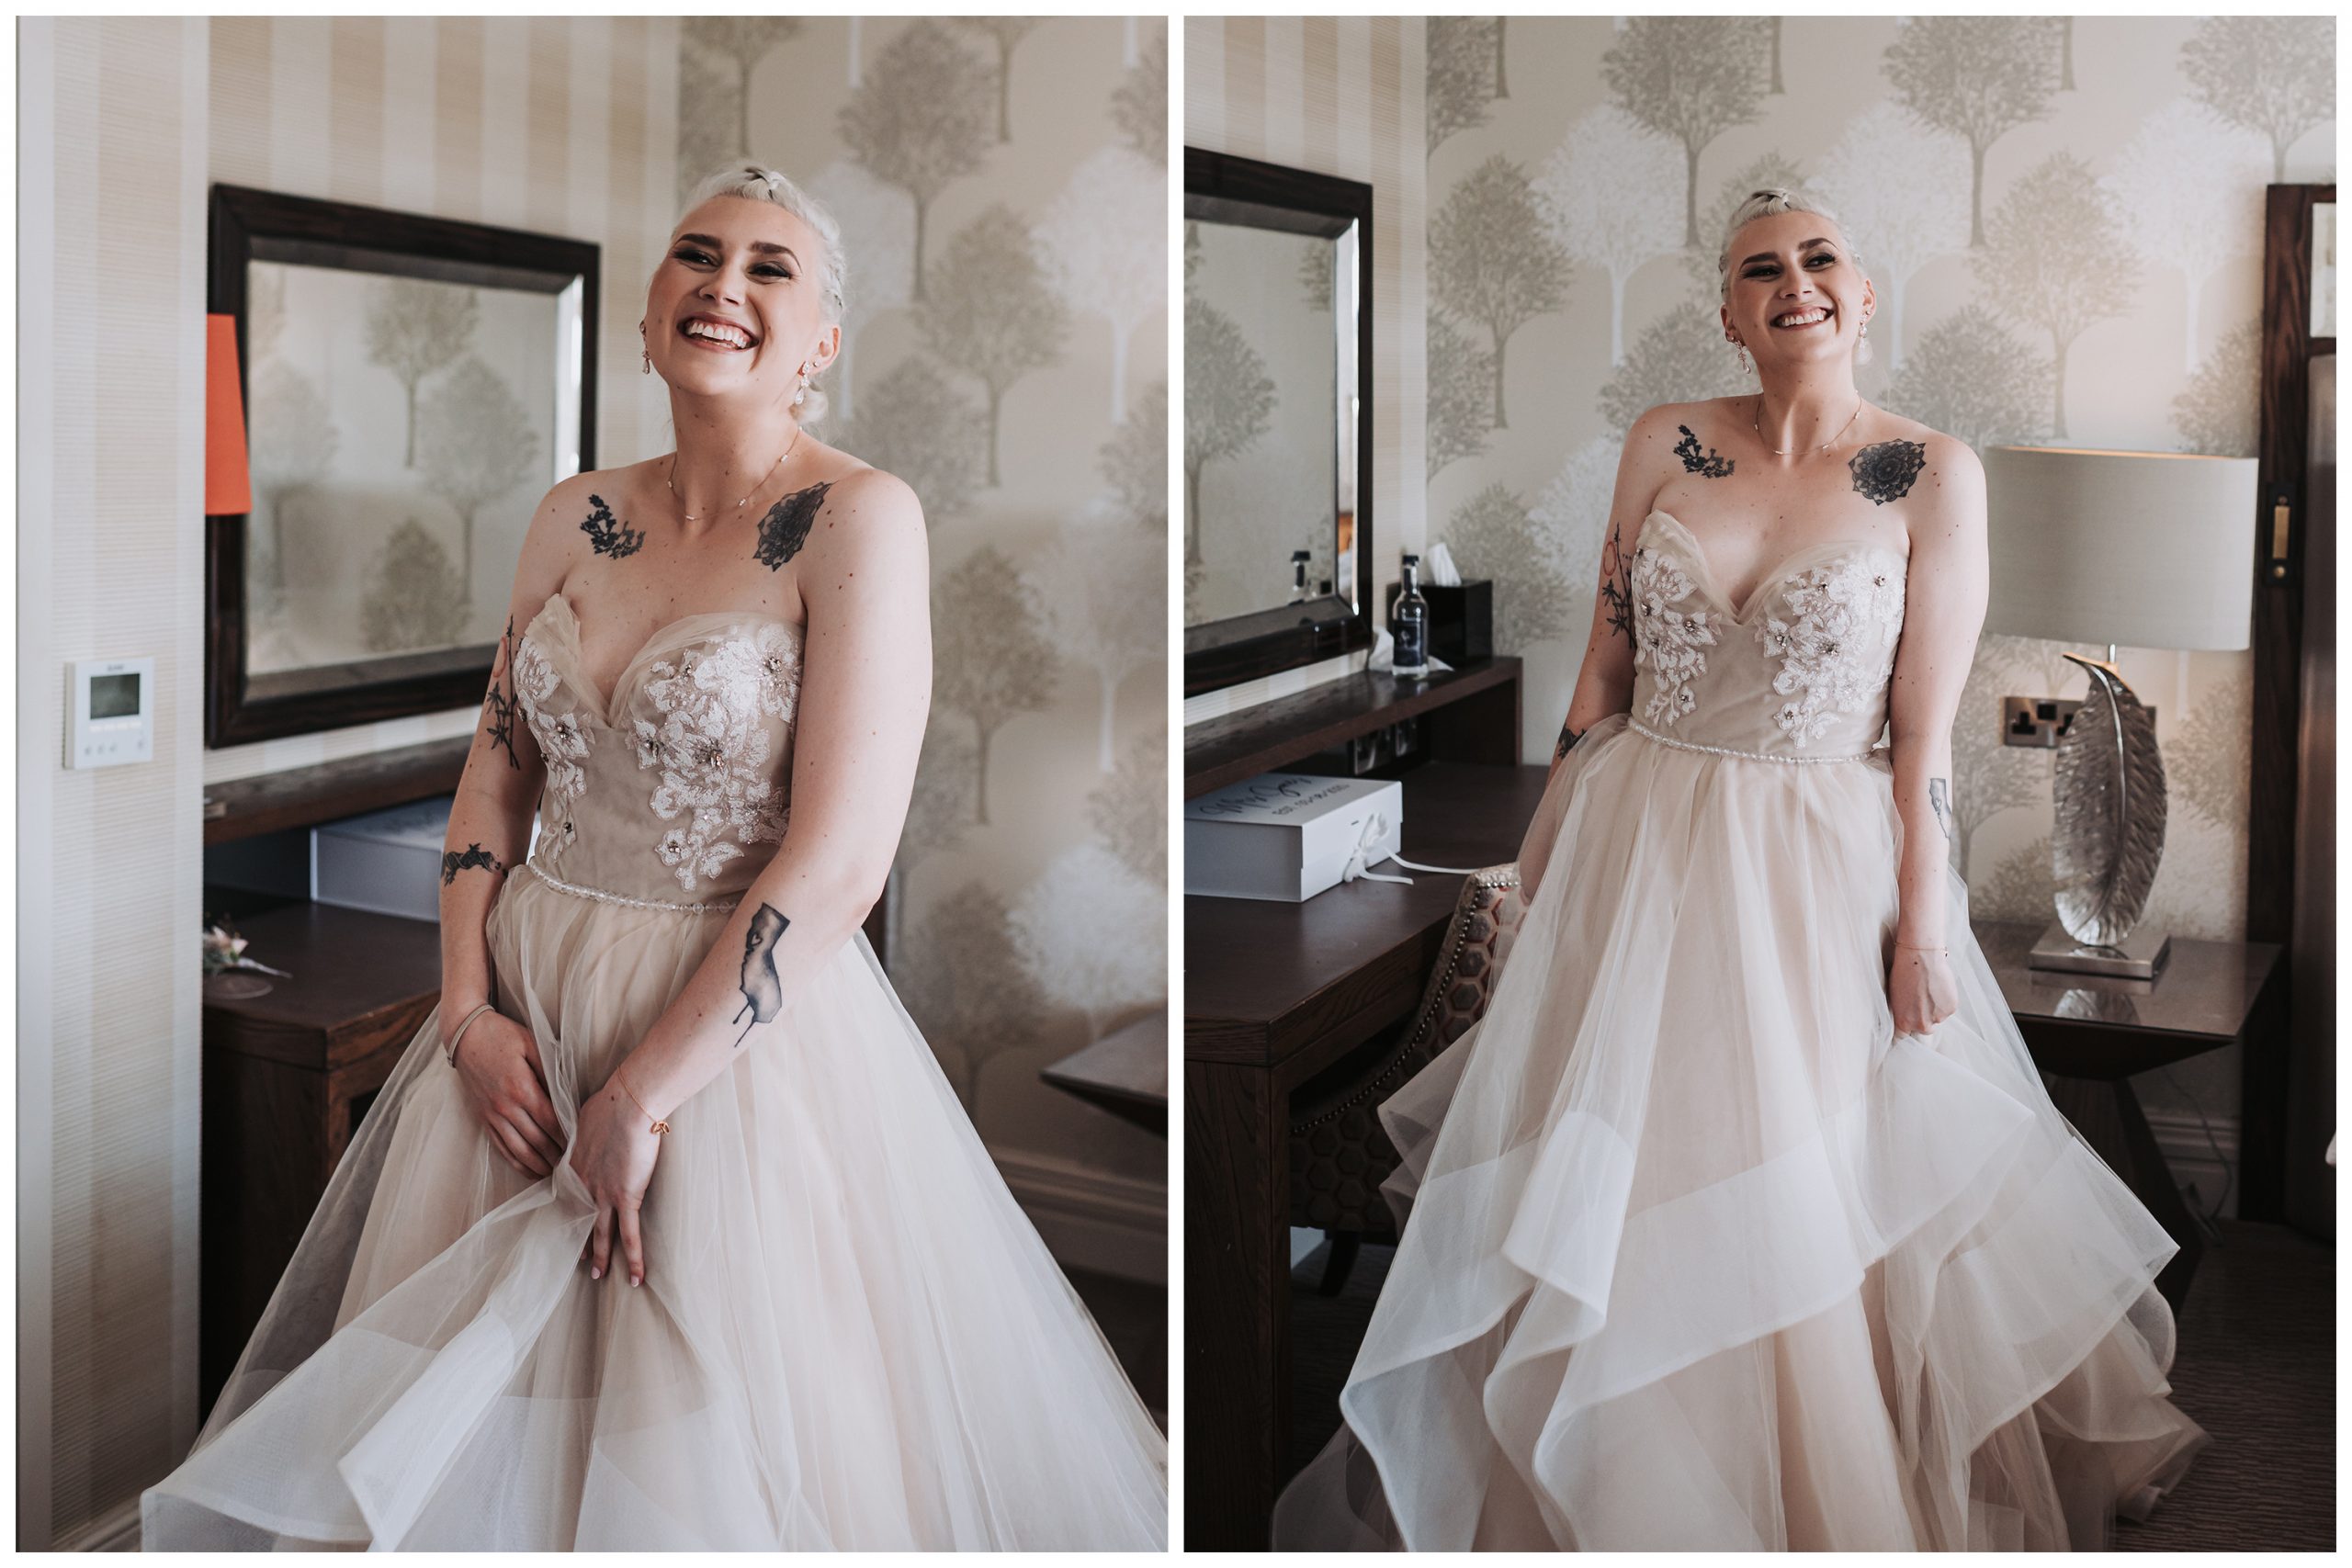 A bride striking smiling poses in her wedding dress on the morning of her wedding.  Image captured by helena Jayne Photography, Grosvenor Pulford Hotel and Spa wedding photographer